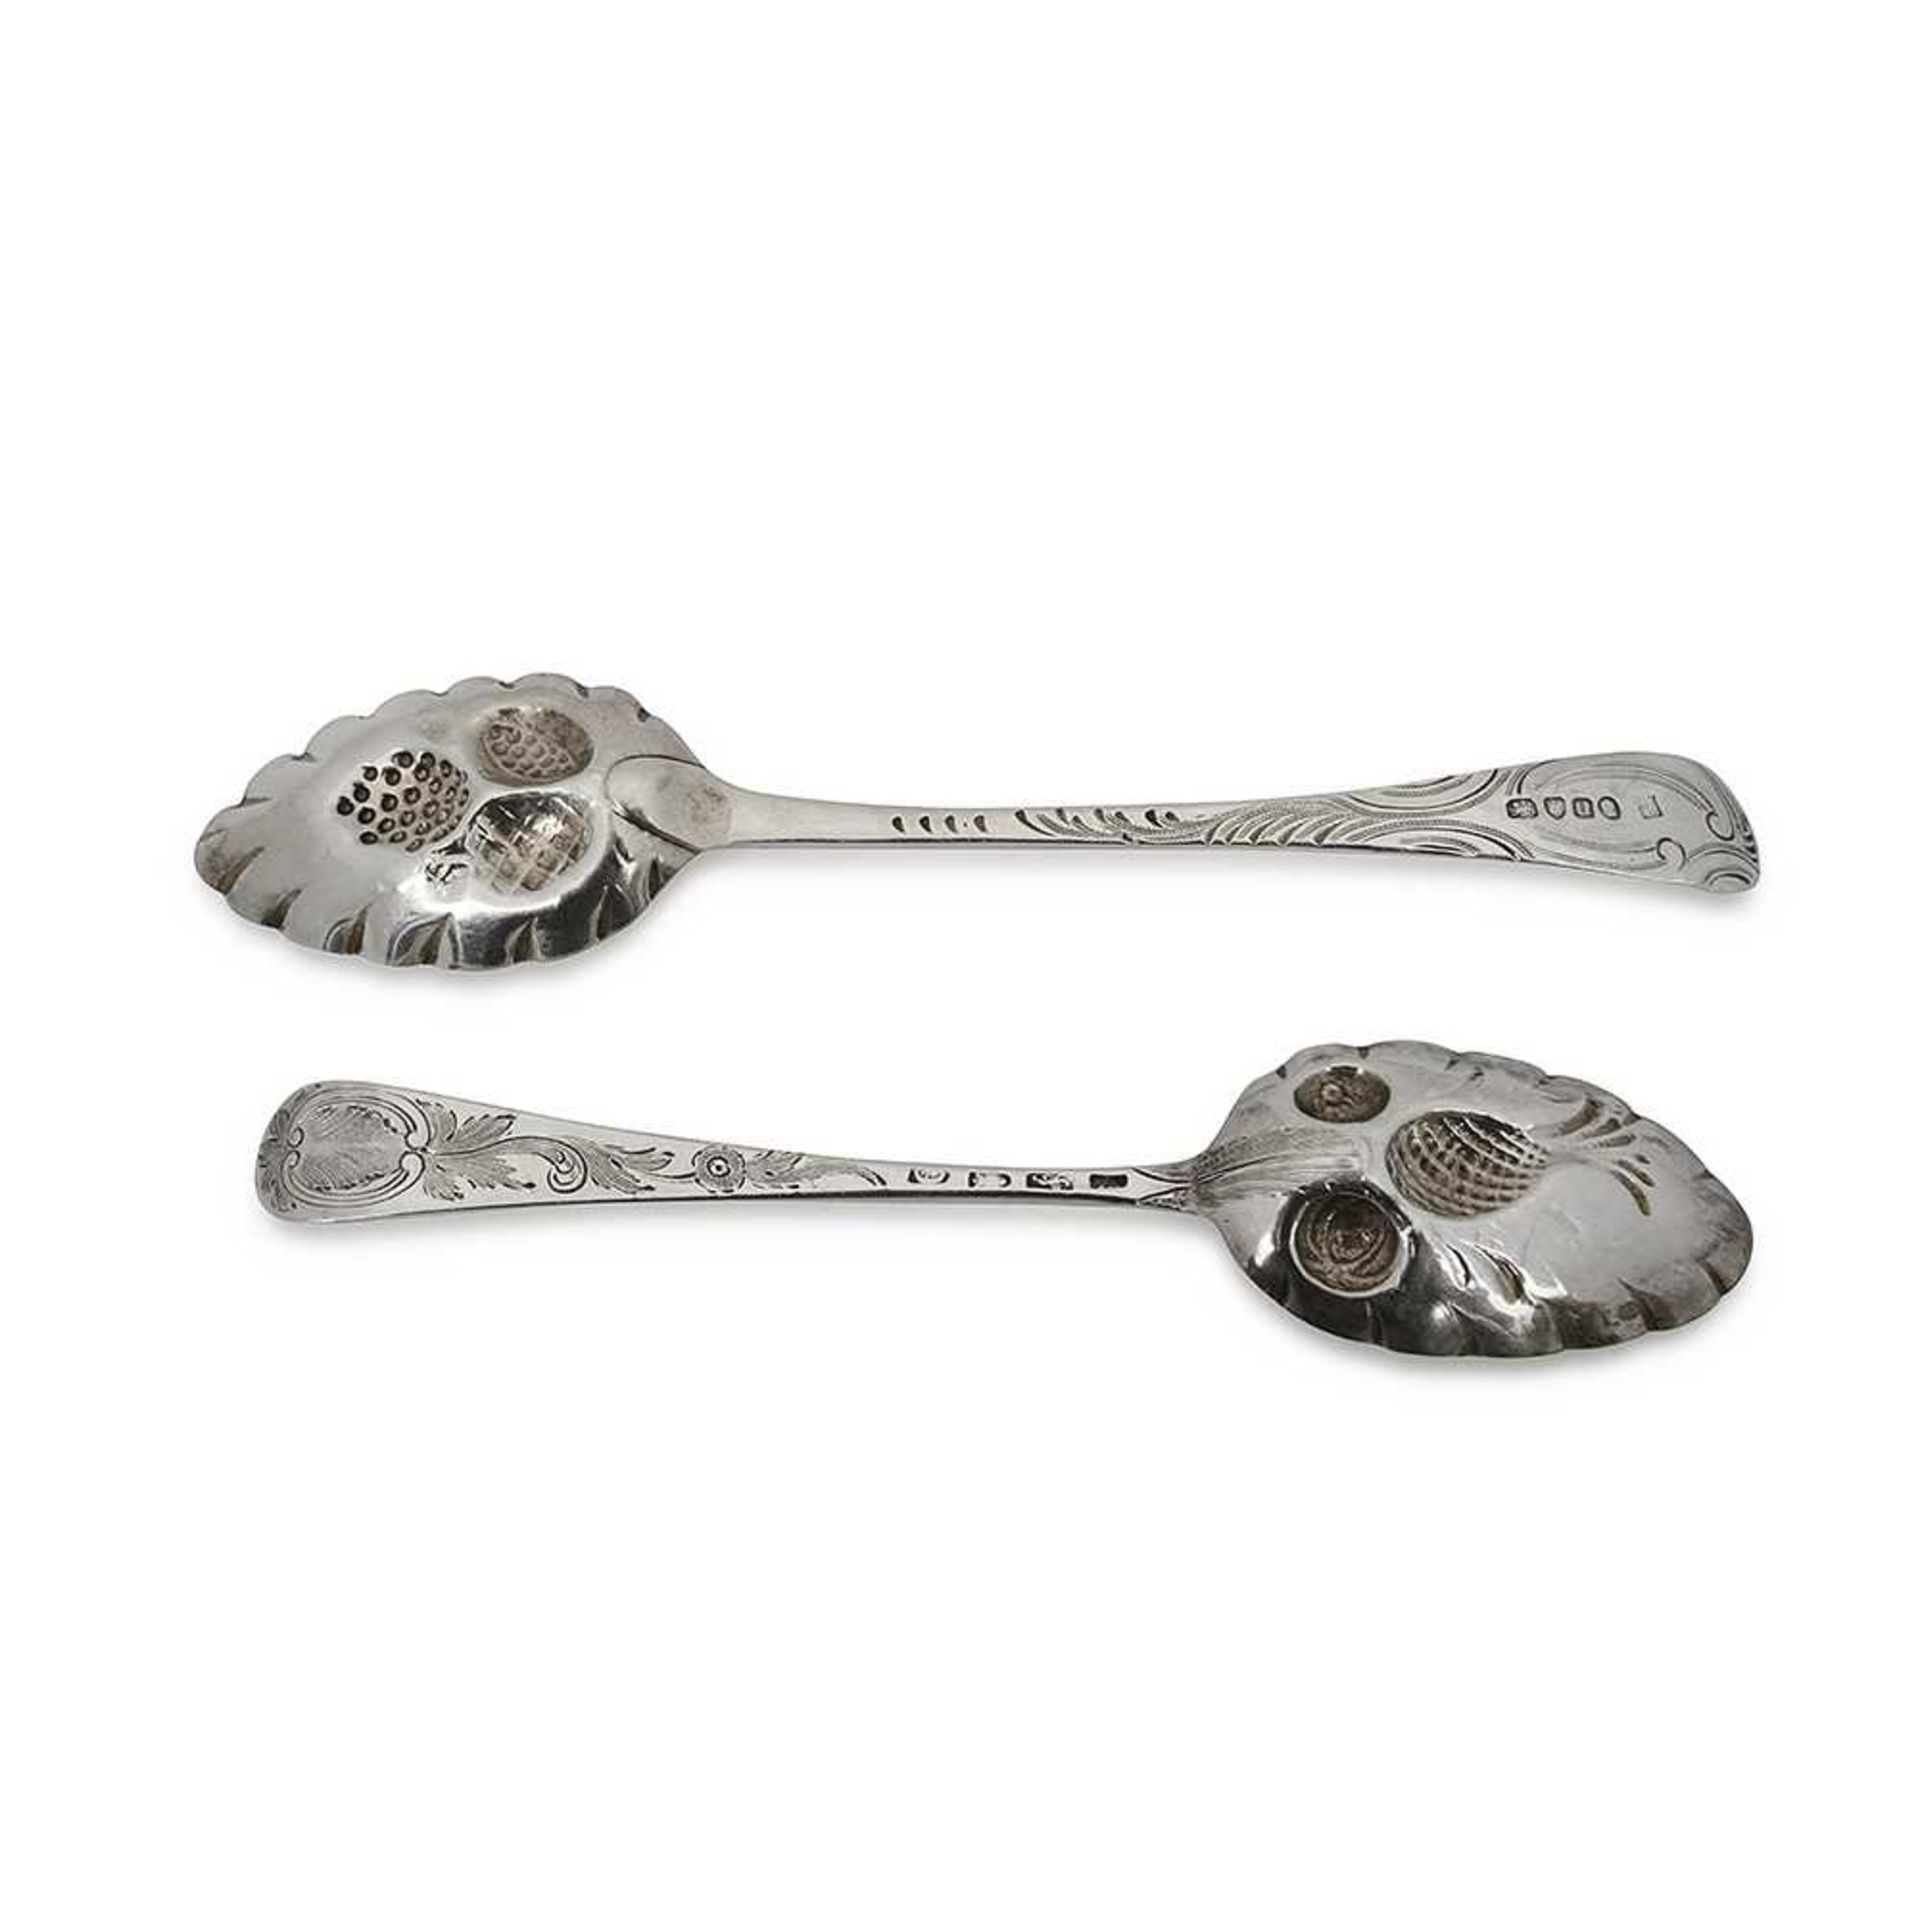 FOUR GEORGIAN SILVER AND SILVER GILT BERRY SPOONS - Image 3 of 4